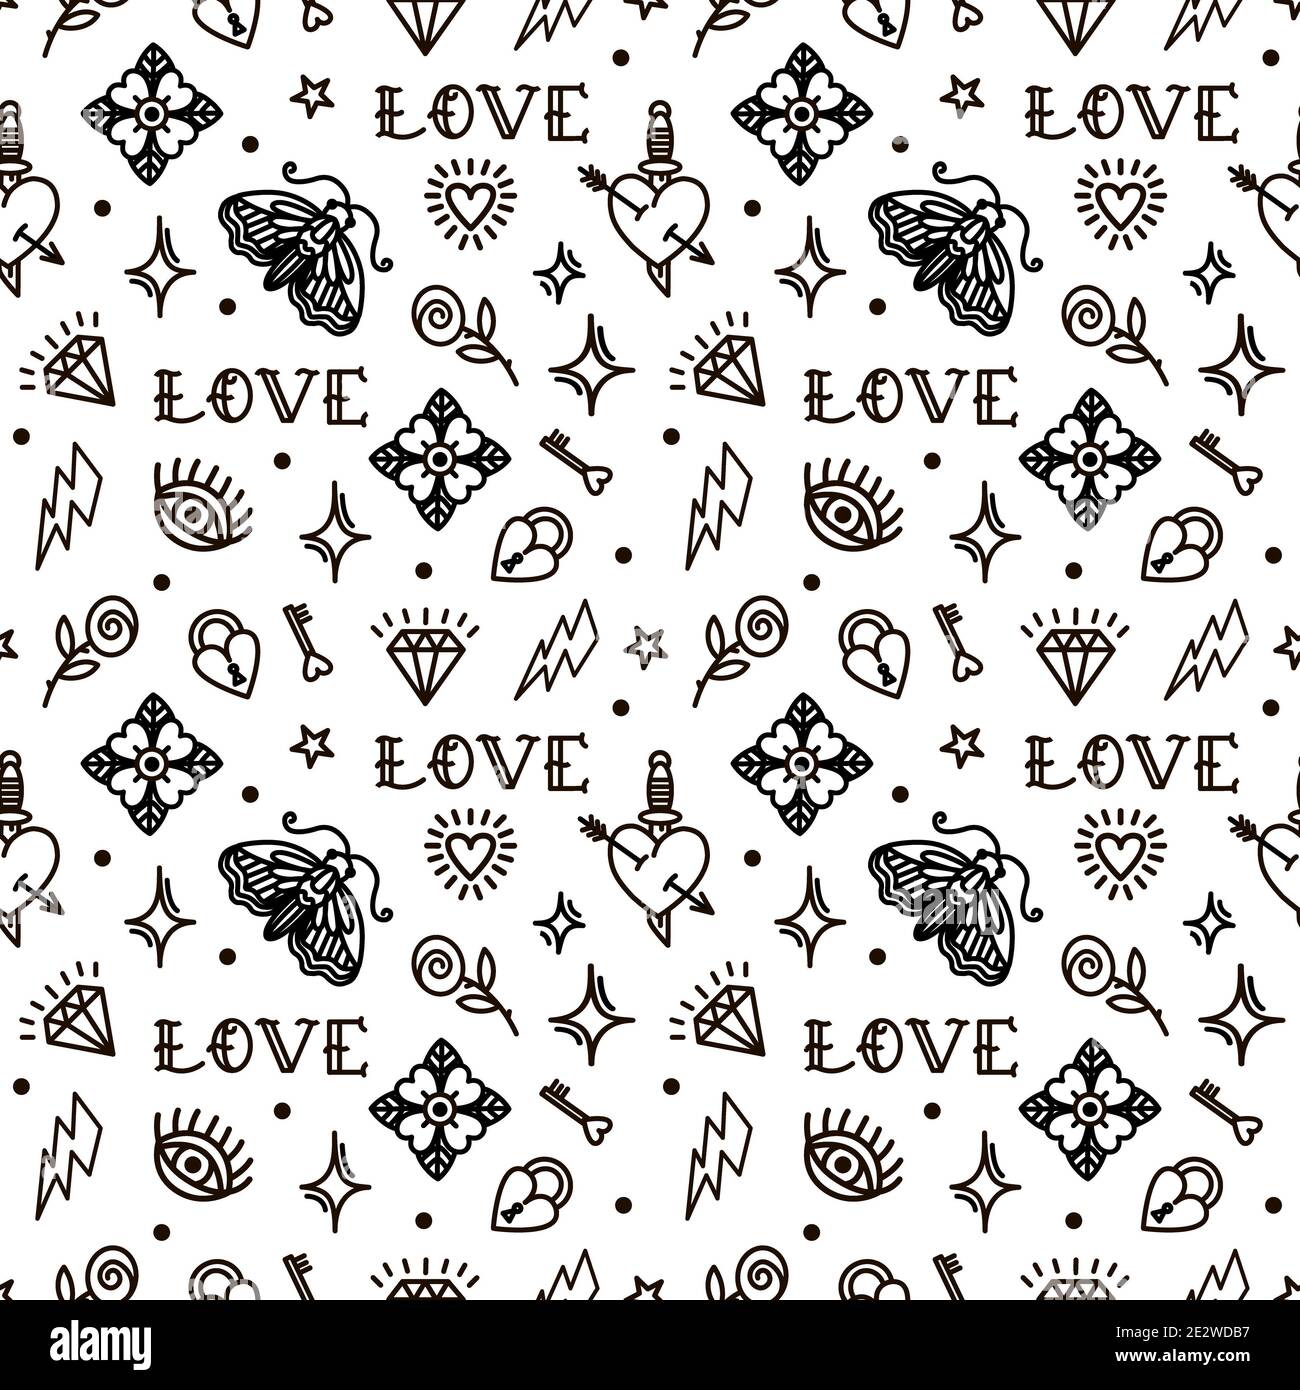 Old school tattoo seamless pattern with love symbols. Design For Valentines  Day Stock Photo - Alamy